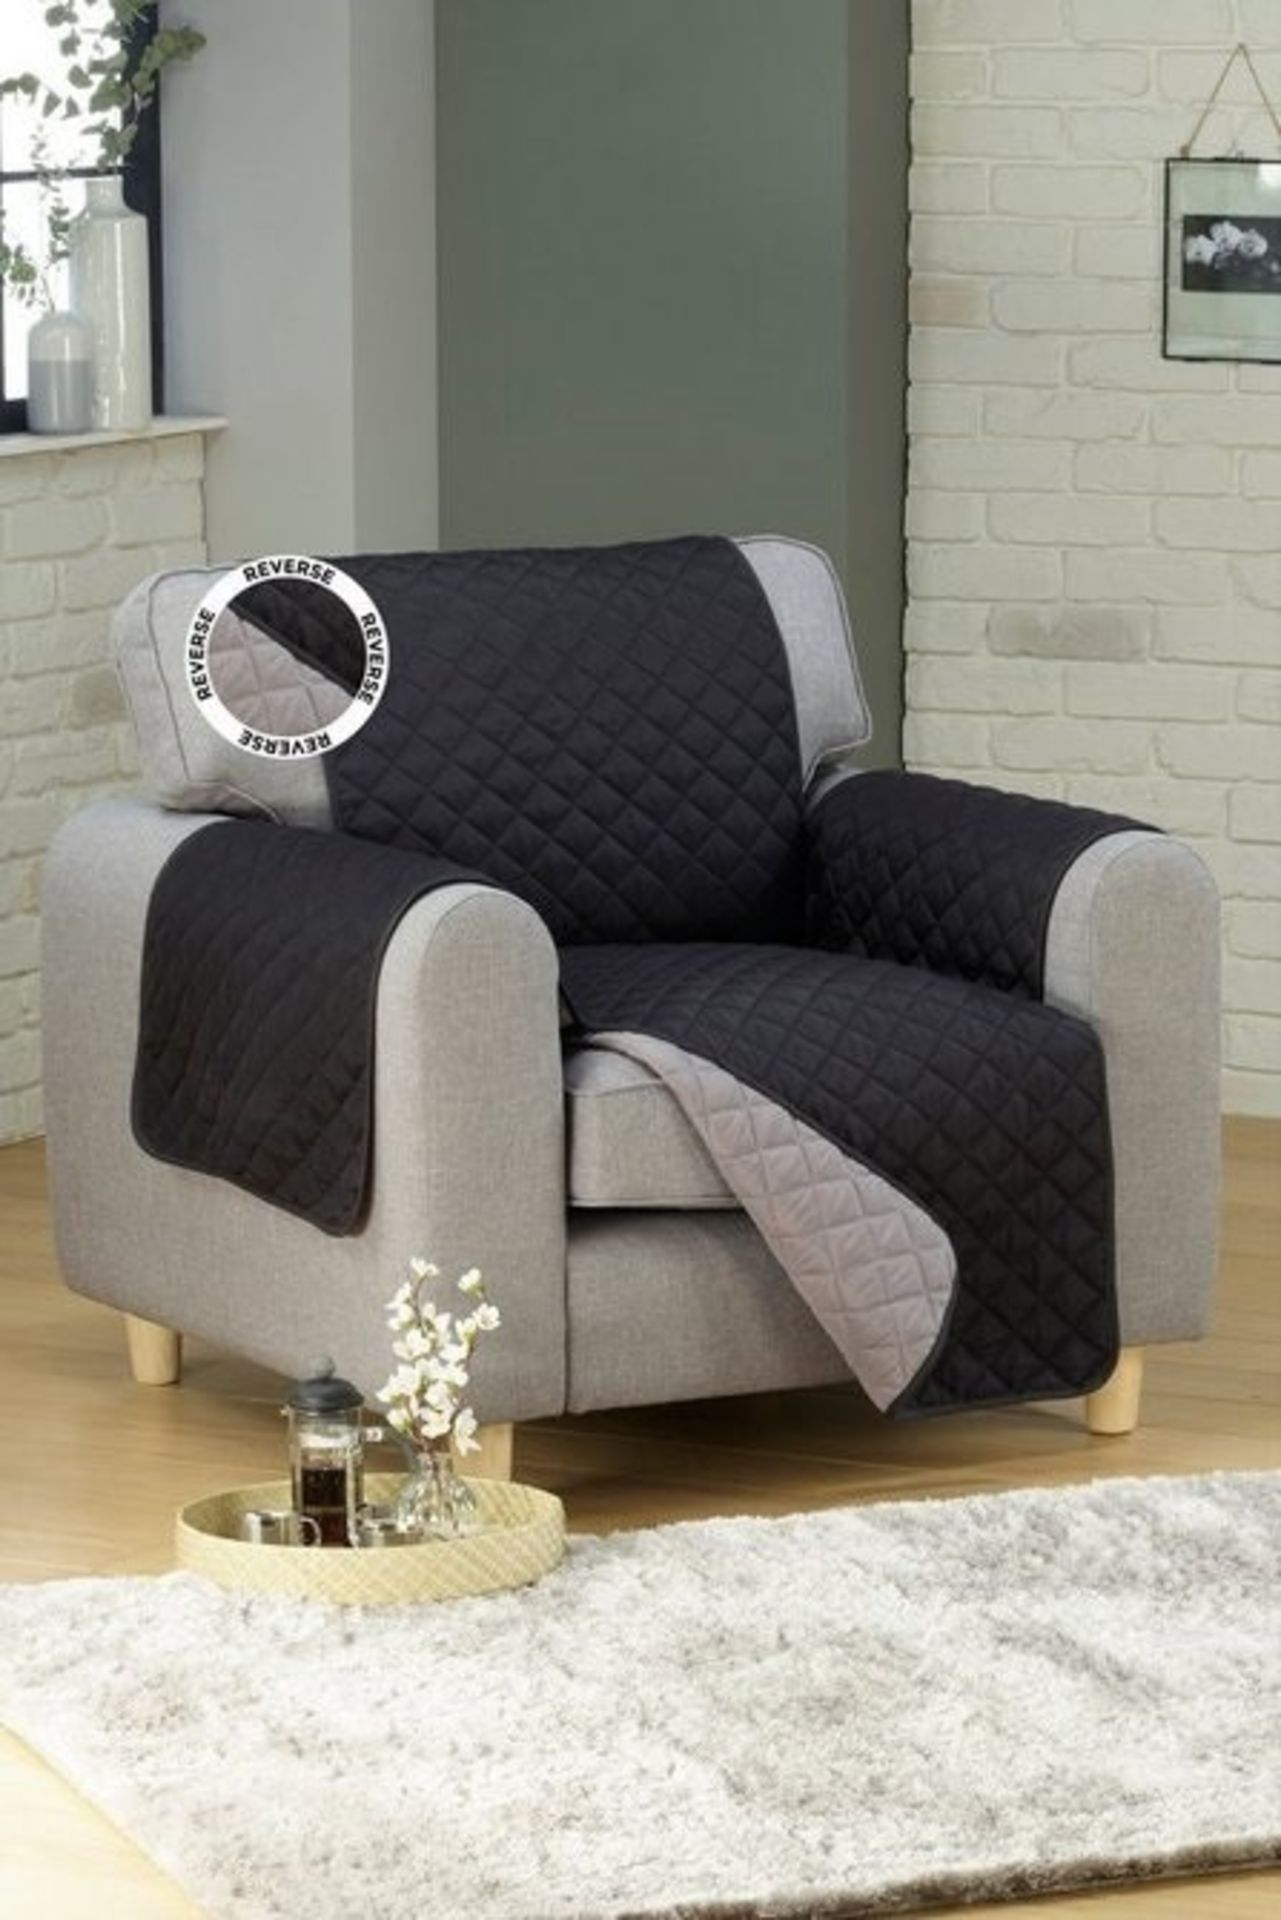 1 BAGGED REVERSIBLE FURNITURE PROTECTOR IN BLACK (PUBLIC VIEWING AVAILABLE)